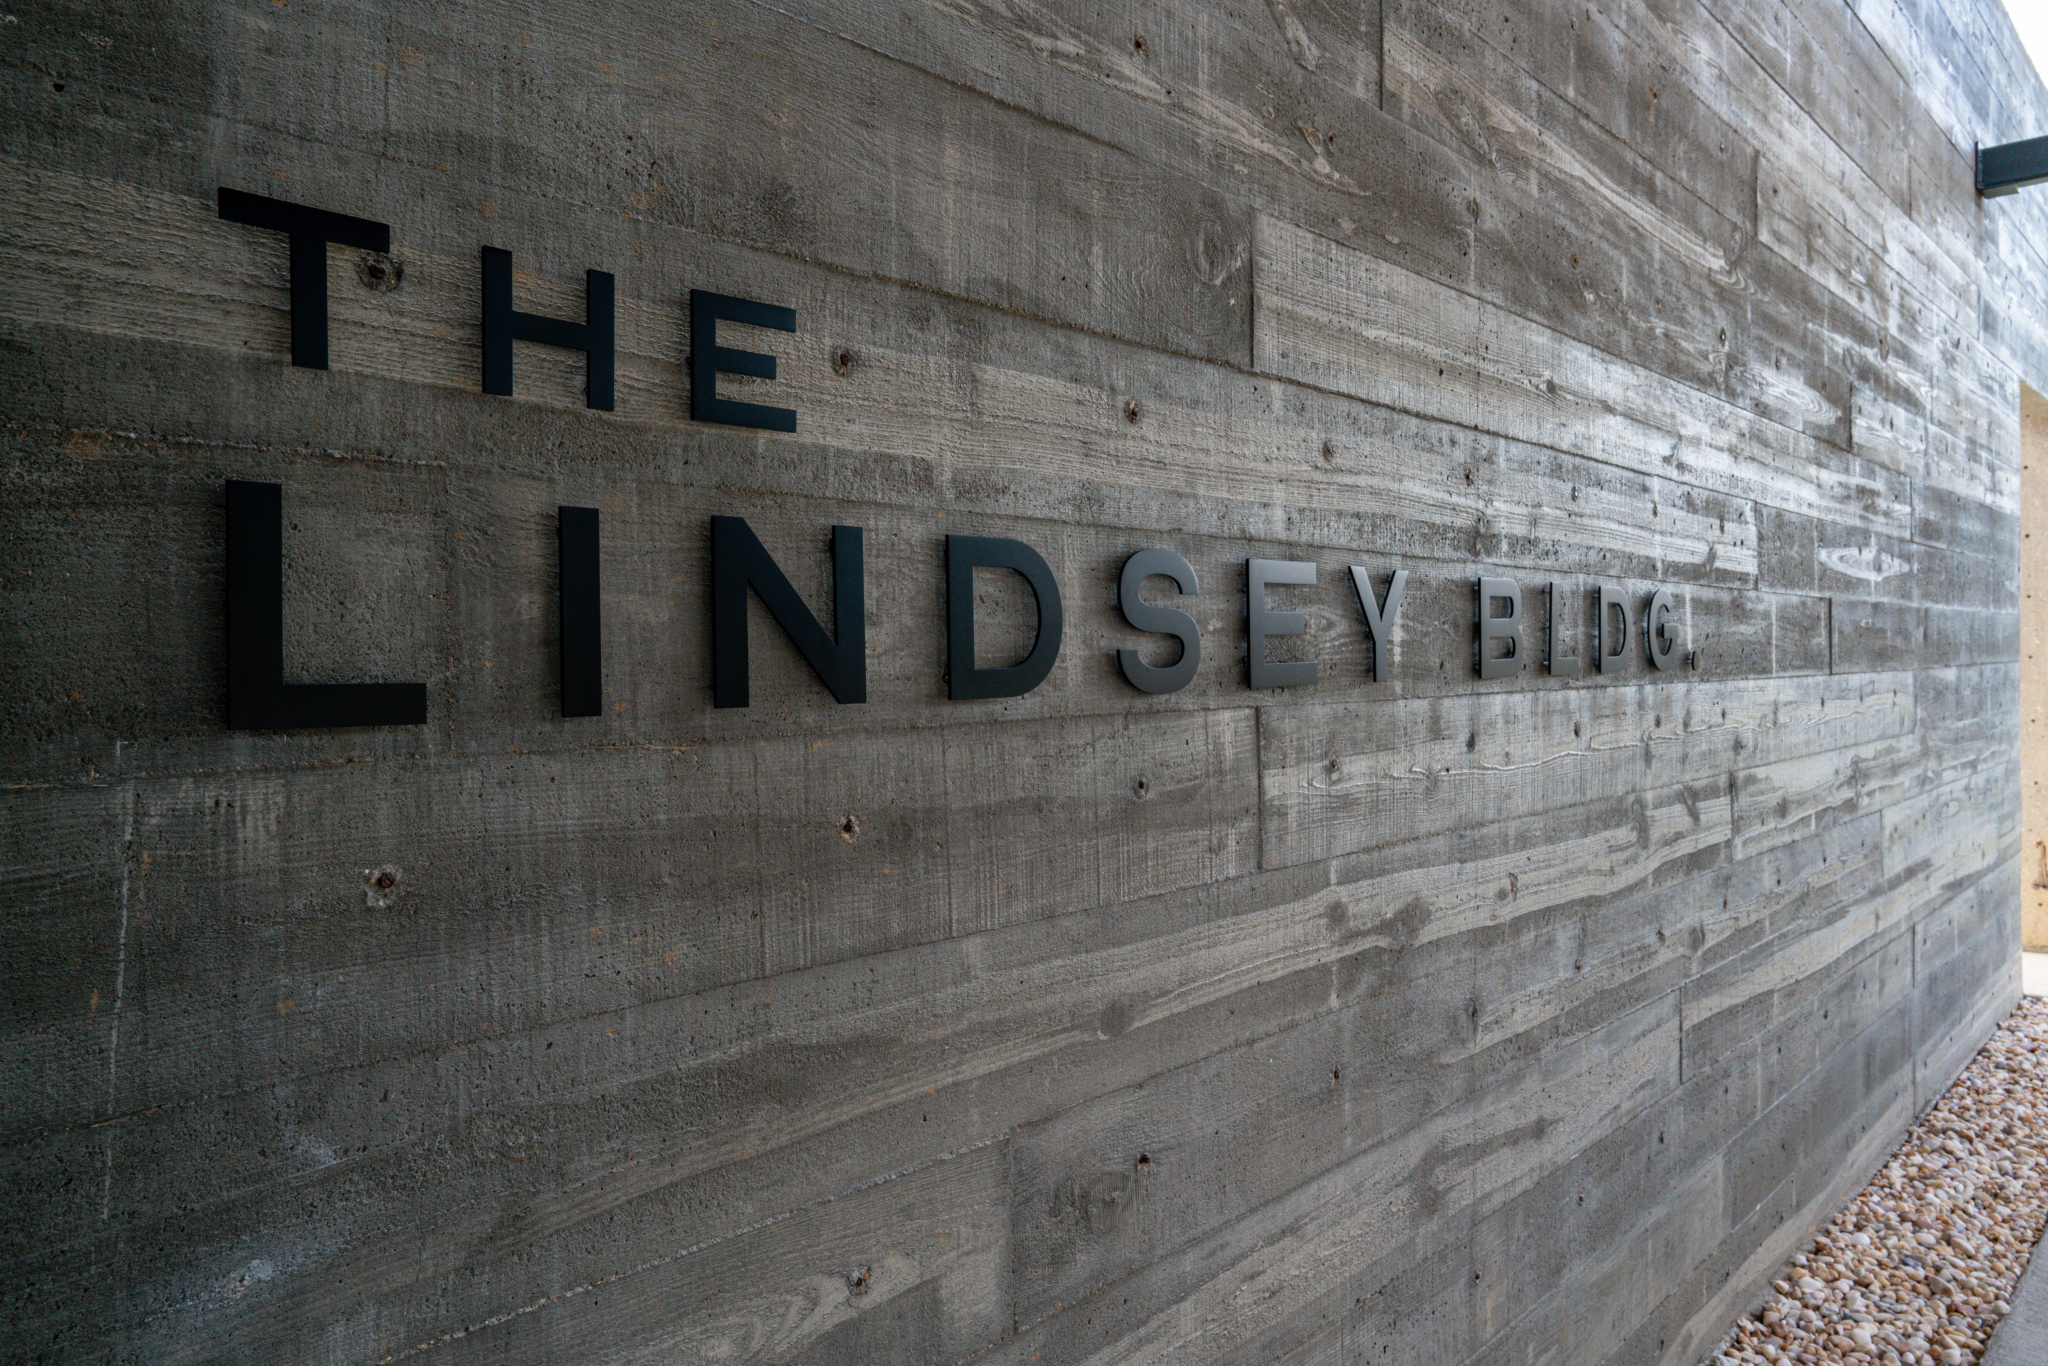 The Lindsey Building 13 Tired of working from home? The Lindsey Building has new coworking + office space [Photos]